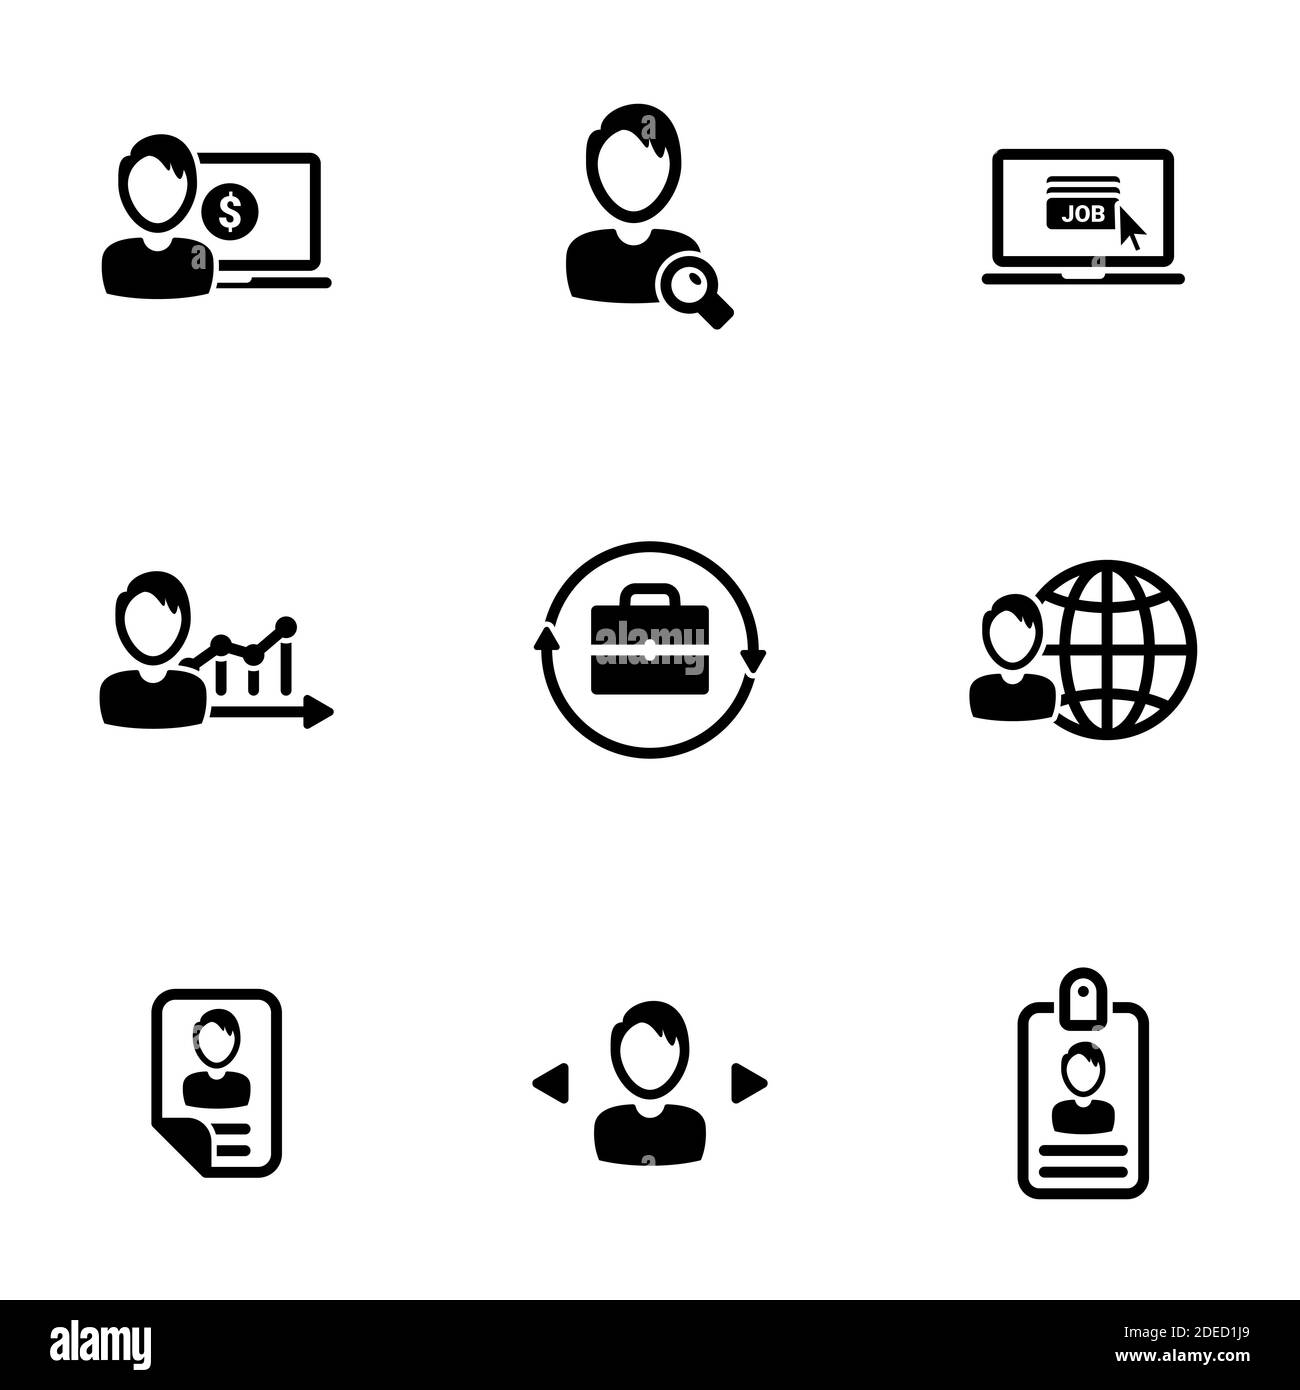 Set of simple icons on a theme Job, vector, design, collection, flat, sign, symbol,element, object, illustration, isolated. White background Stock Vector